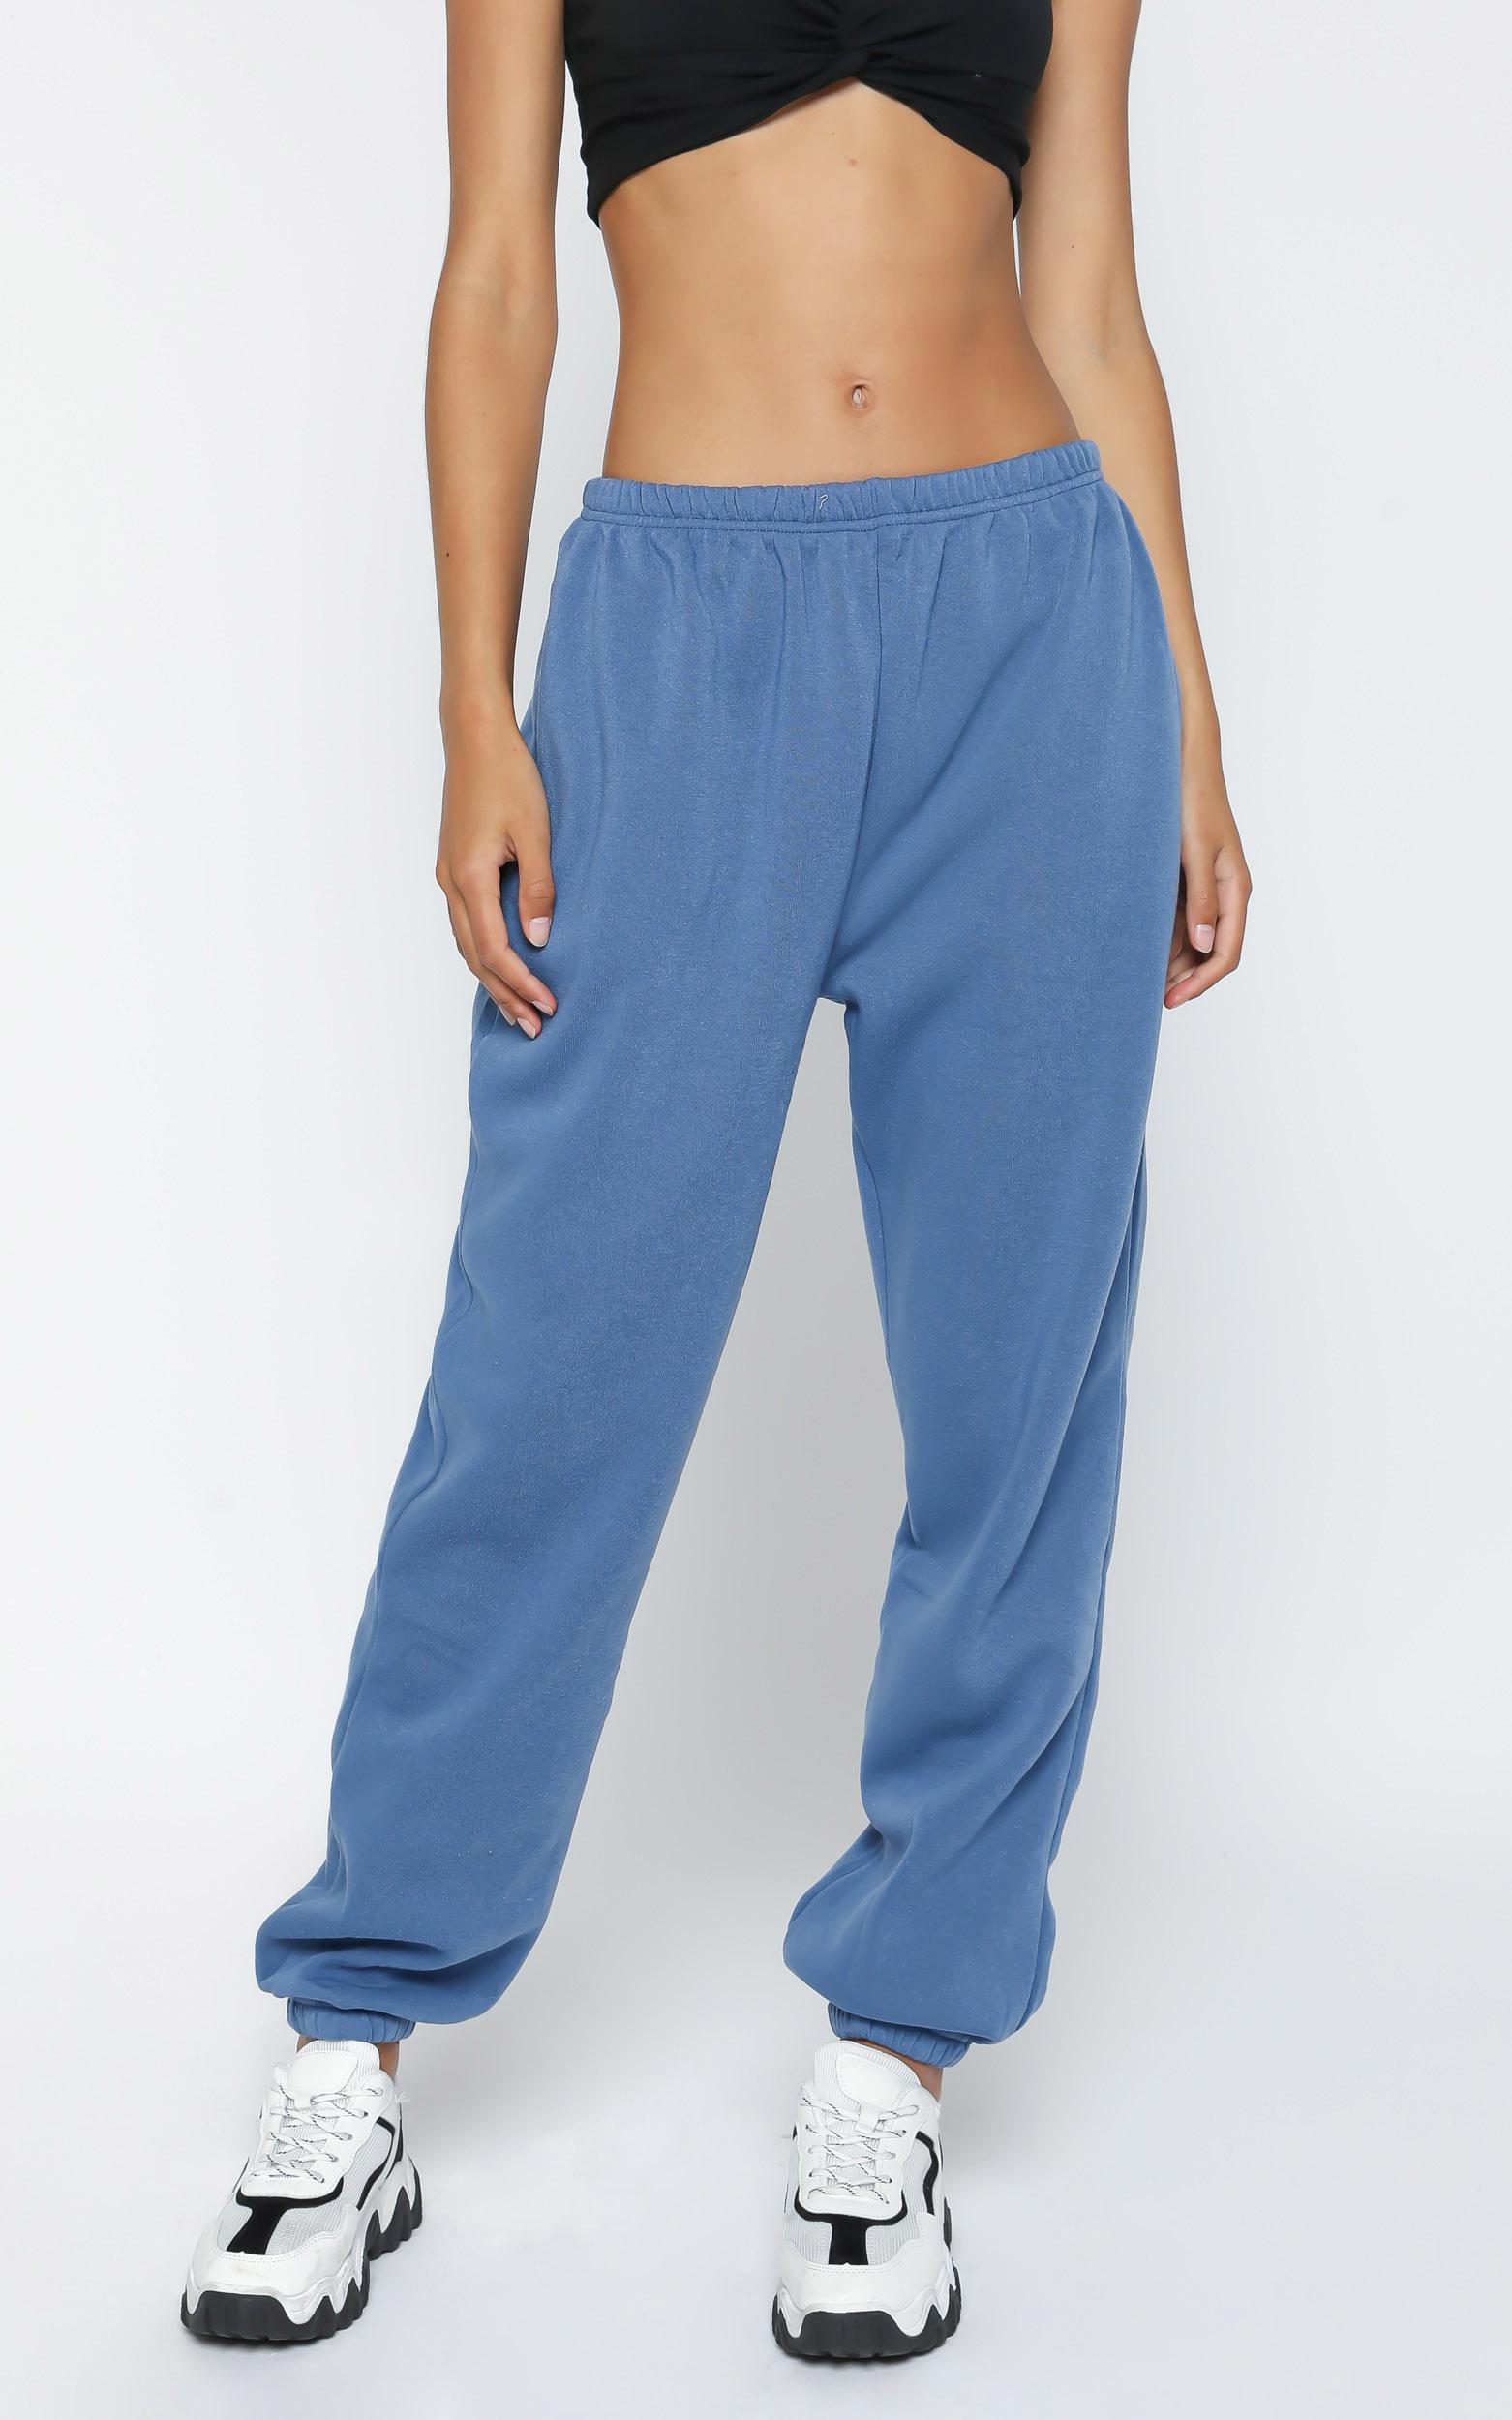 Lioness - Academy Sweatpants in Dusty Blue - 04, BLU1, hi-res image number null